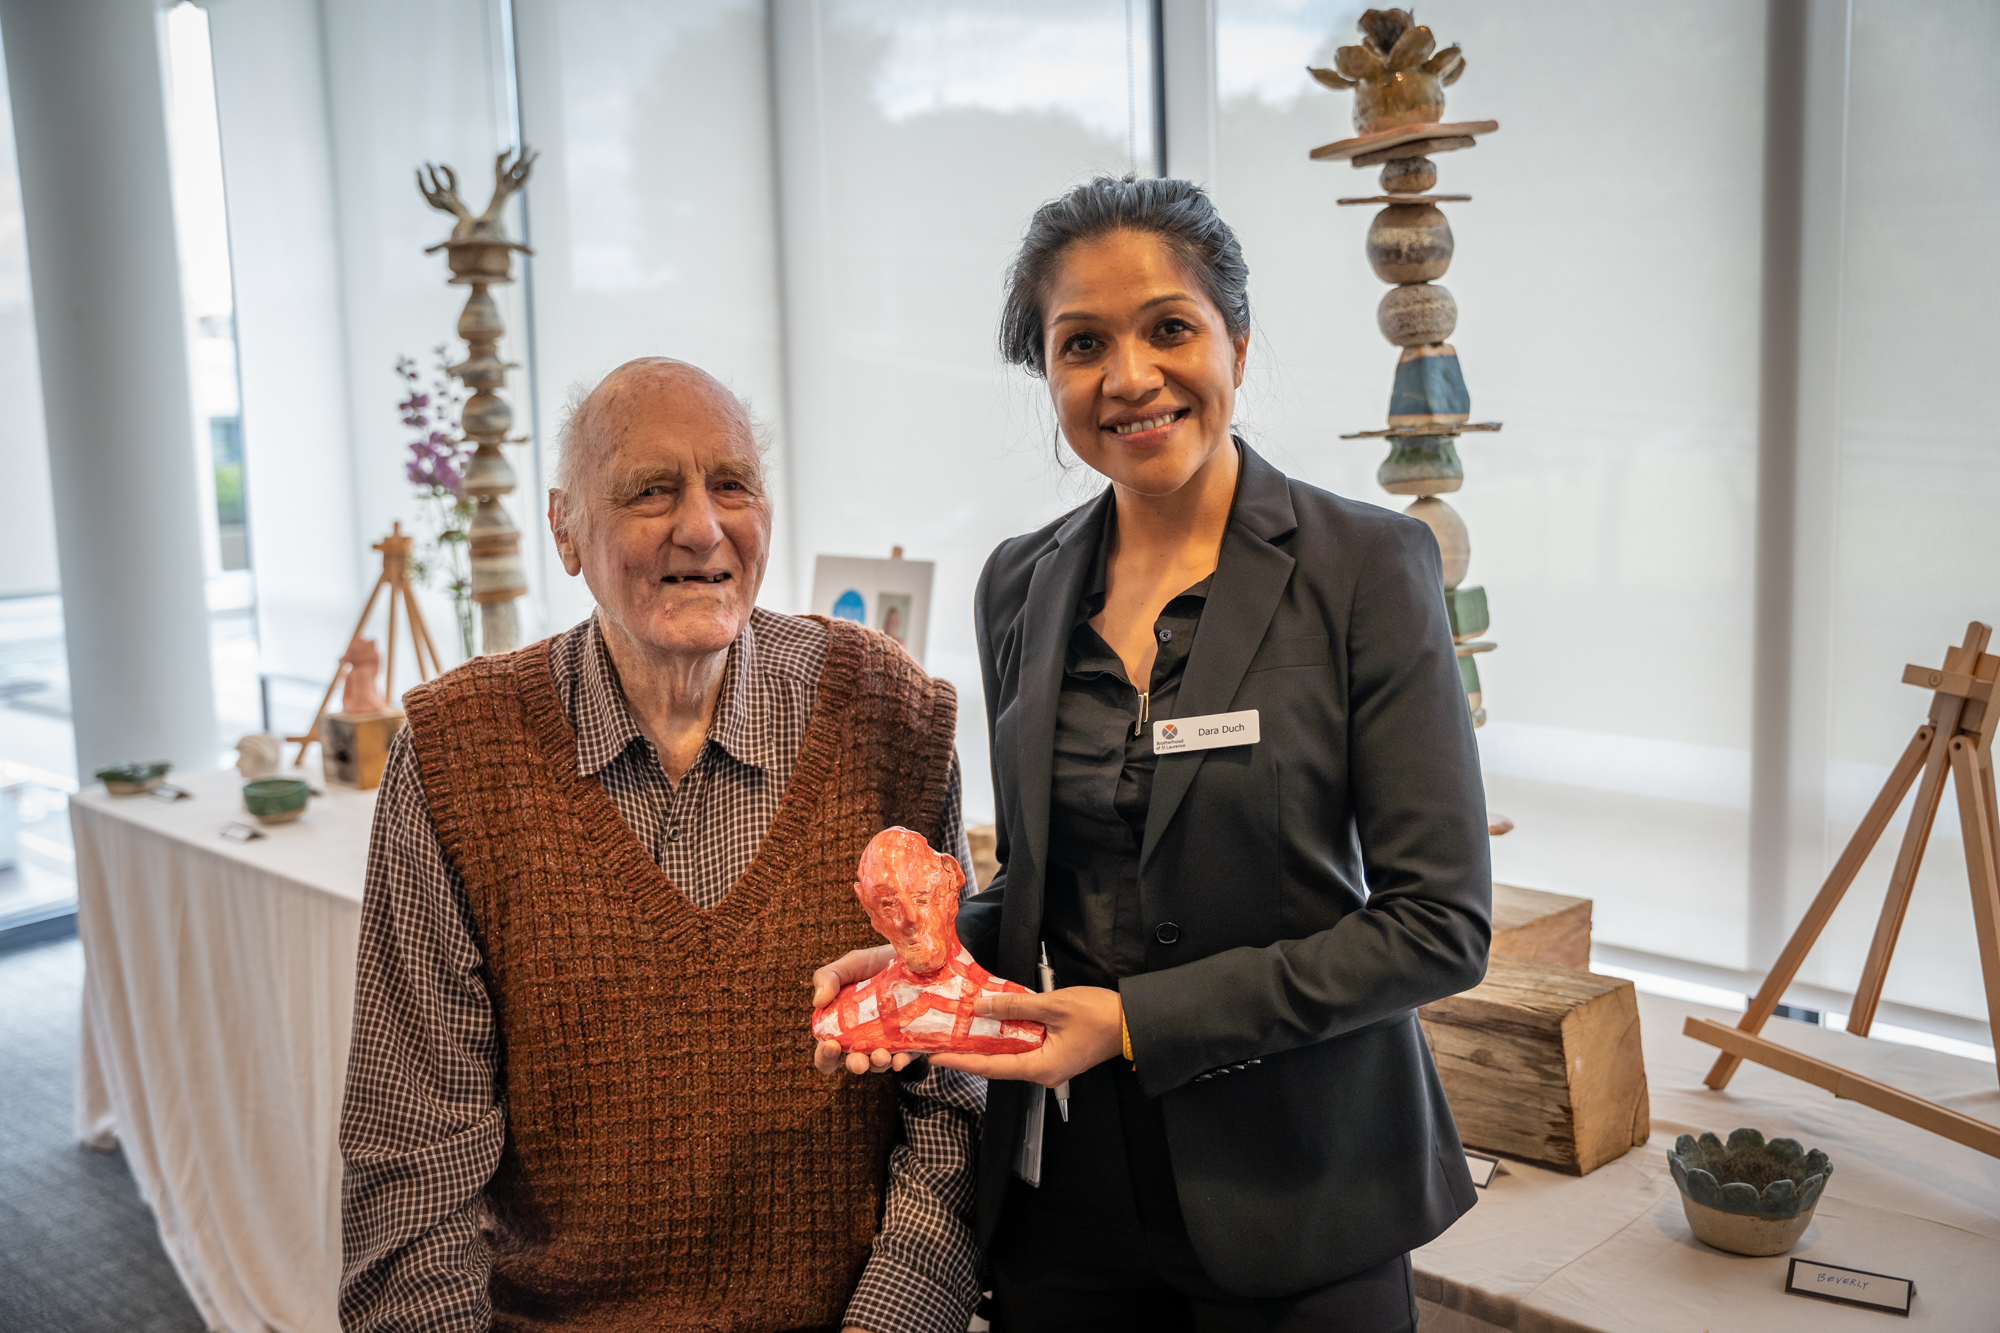 Resident and artist Noel Belfrage with staff member Dara Duch who is holding the clay sculpture he created.